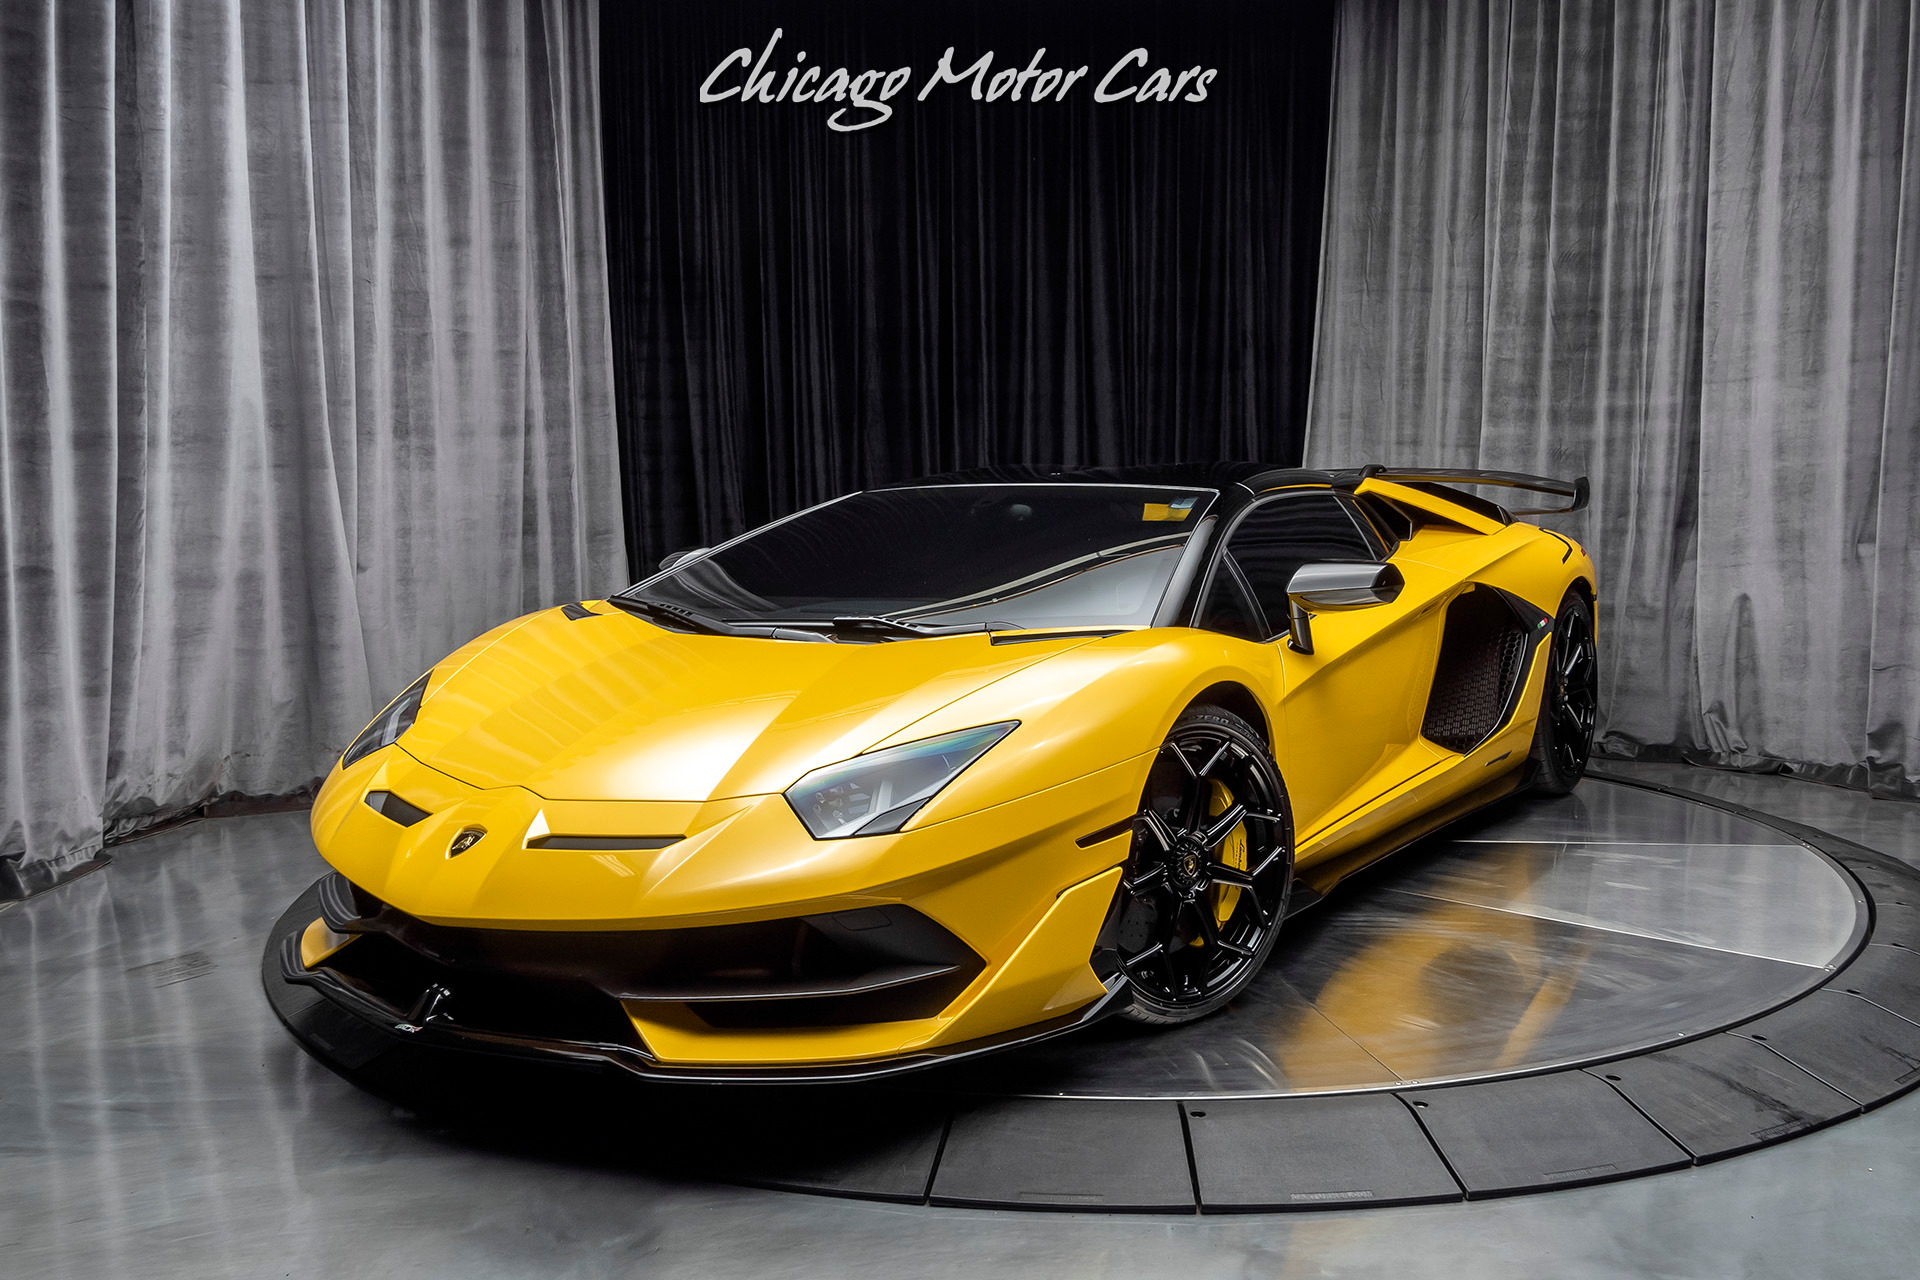 Used Lamborghini Aventador Svj Roadster Only 263 Miles New Giallo Orion Rare For Sale Special Pricing Chicago Motor Cars Stock